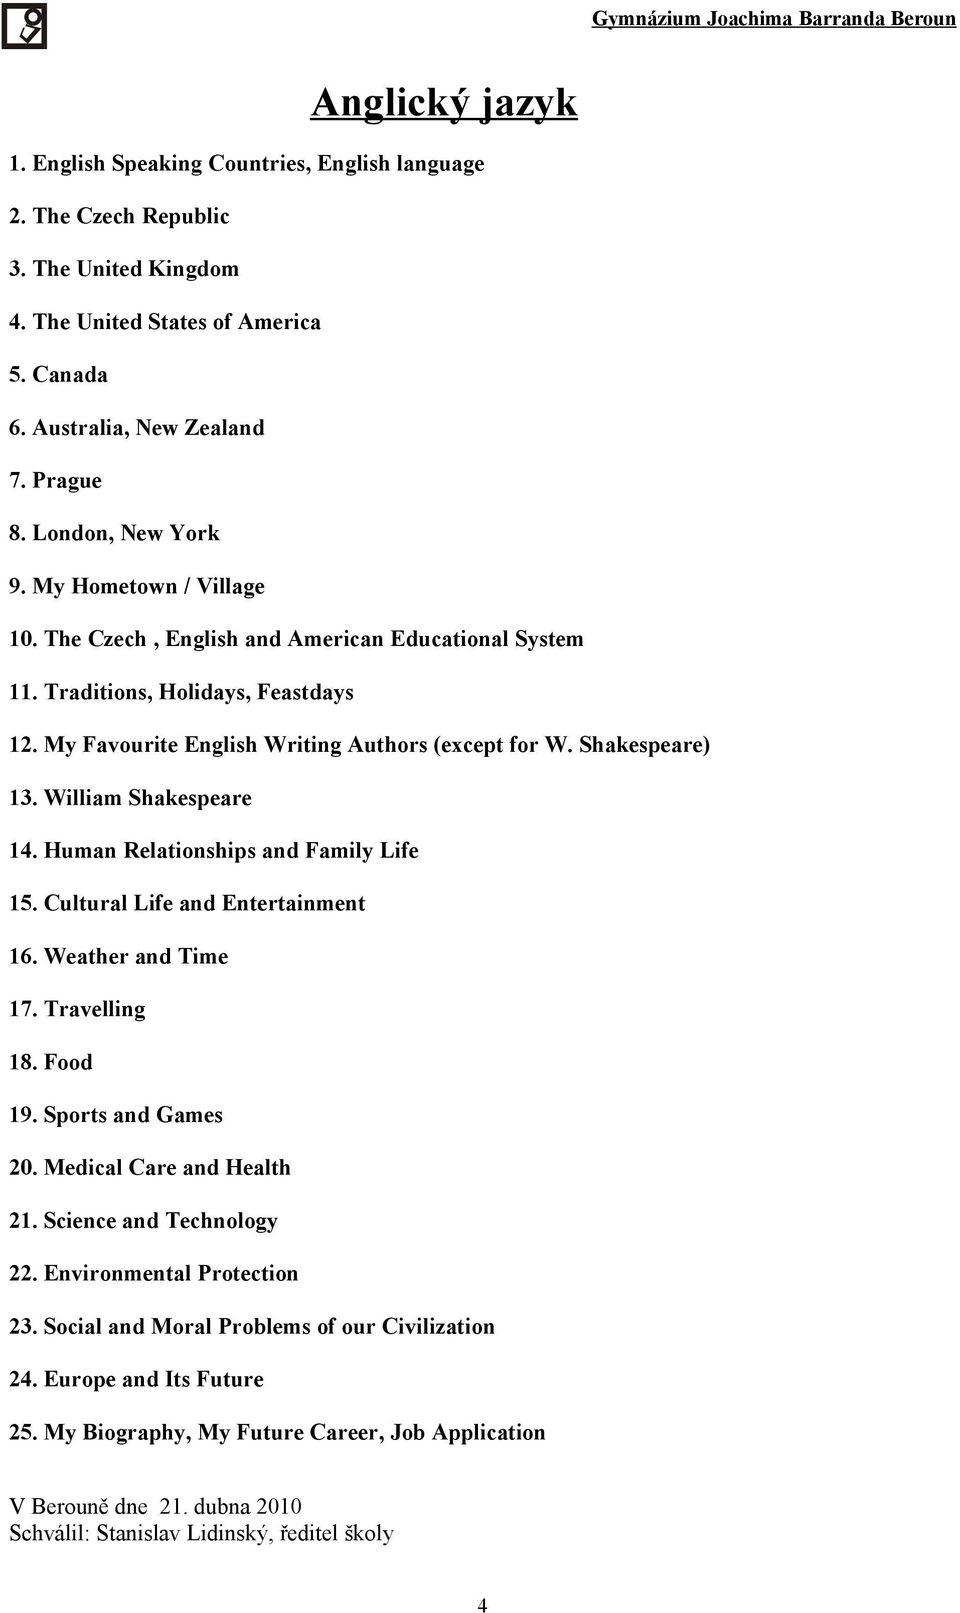 Shakespeare) 13. William Shakespeare 14. Human Relationships and Family Life 15. Cultural Life and Entertainment 16. Weather and Time 17. Travelling 18. Food 19. Sports and Games 20.